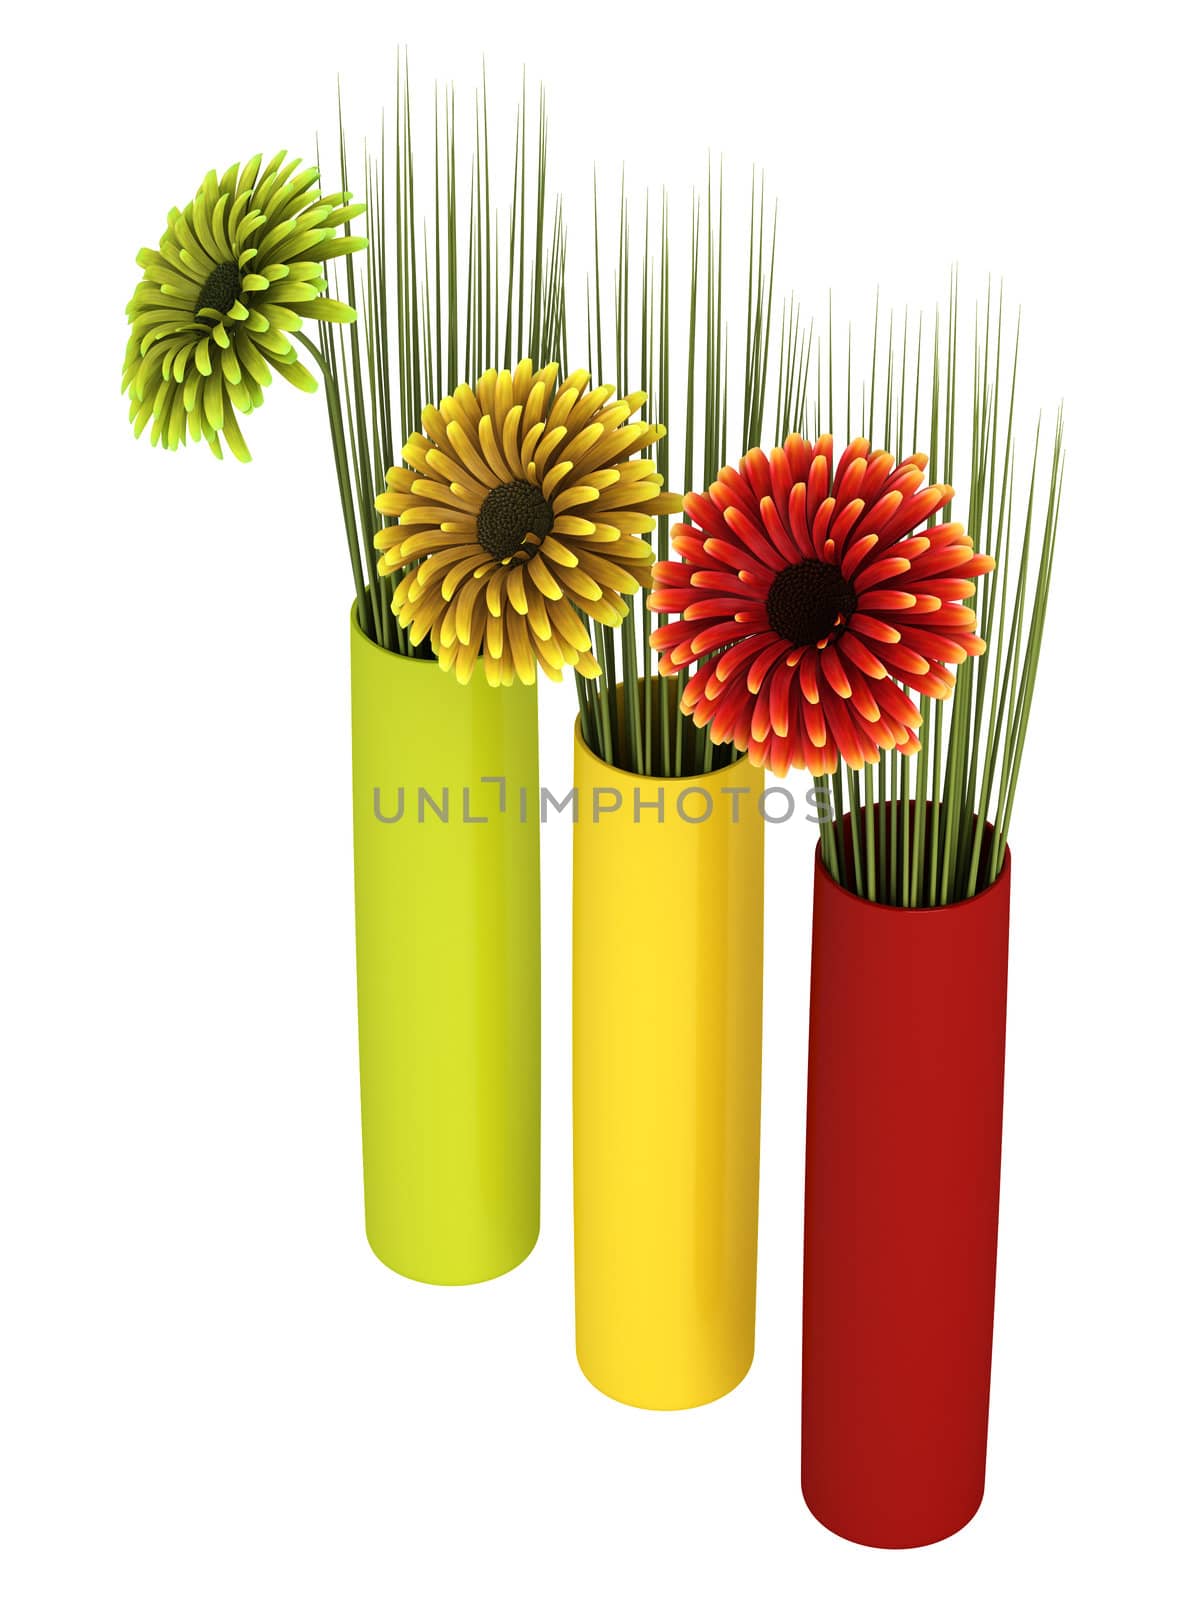 Three ornamental gerbera daisies in red, yellow and green with matching cylindrical containers, isolated on white